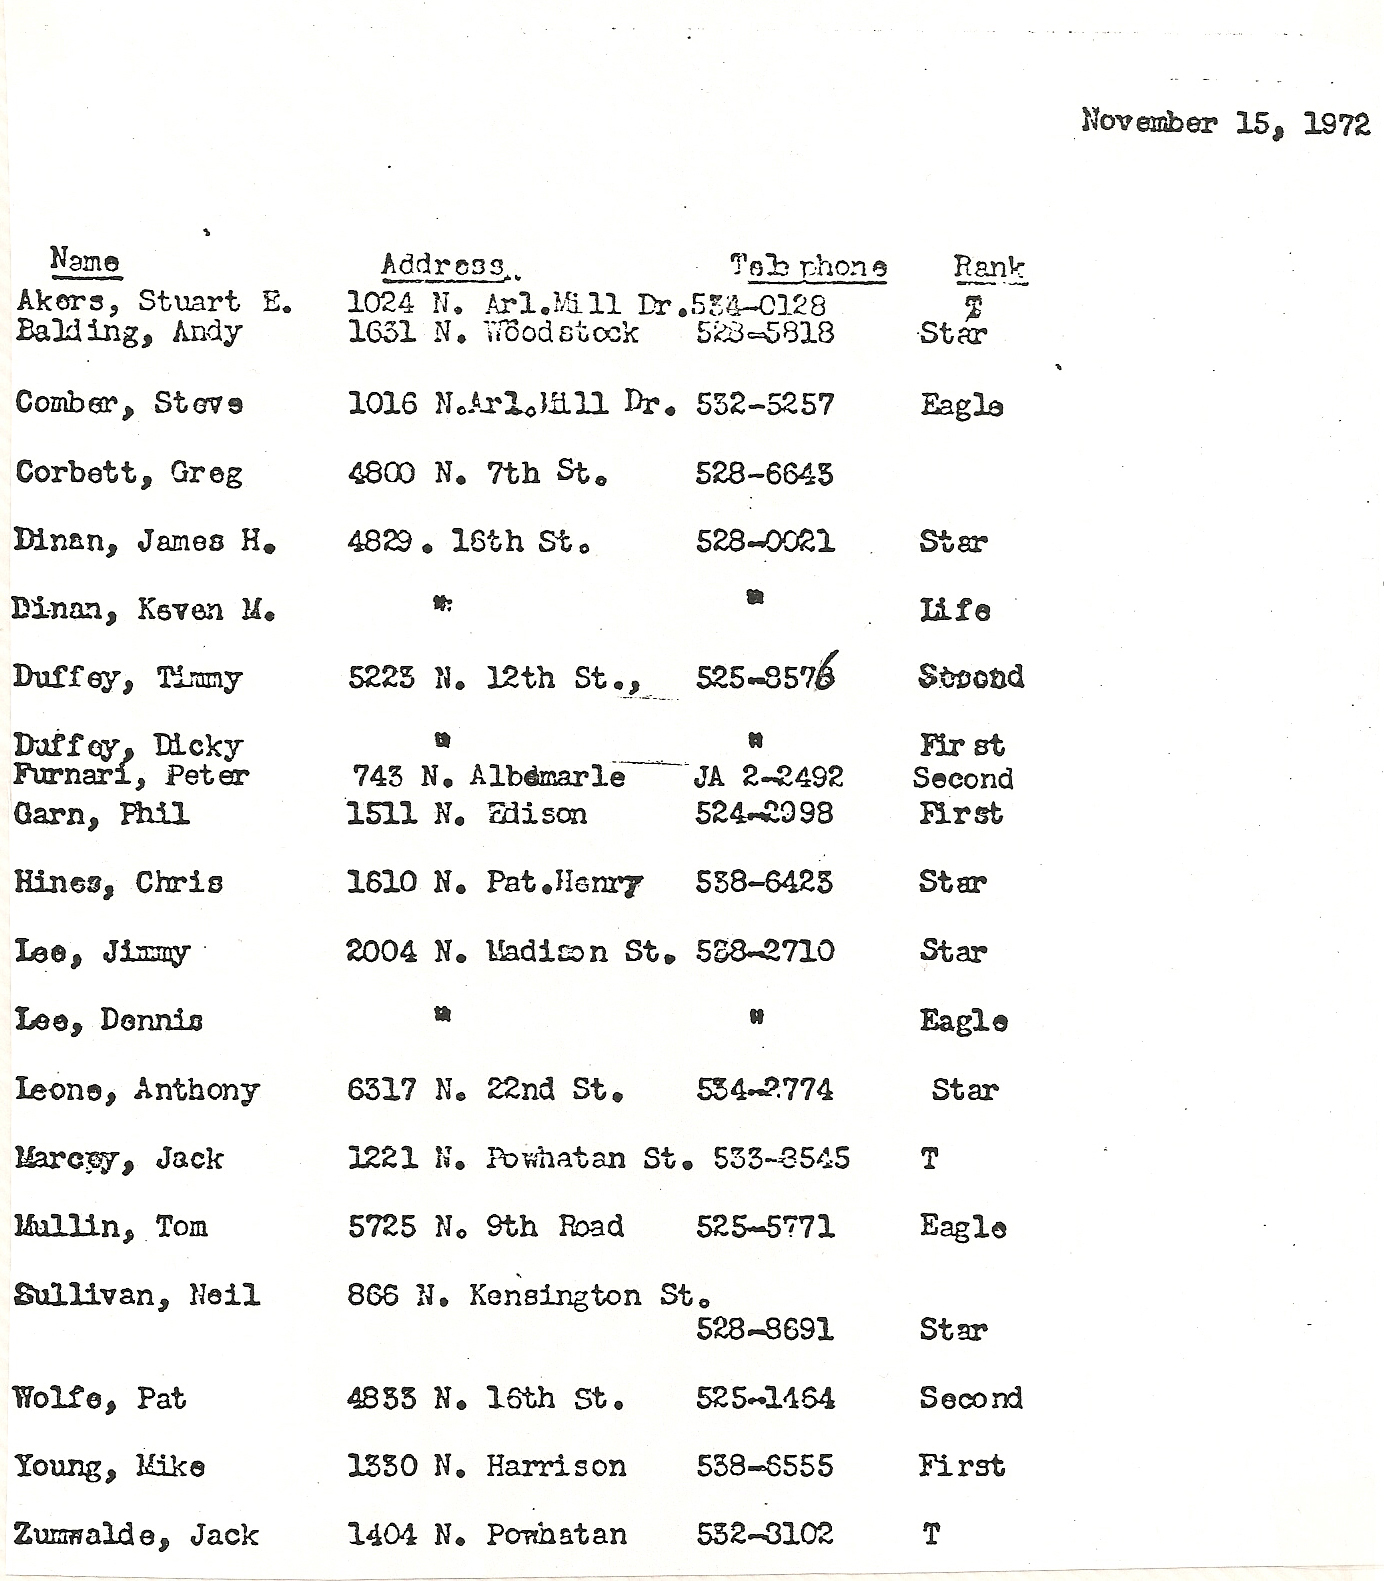 1972 Roster